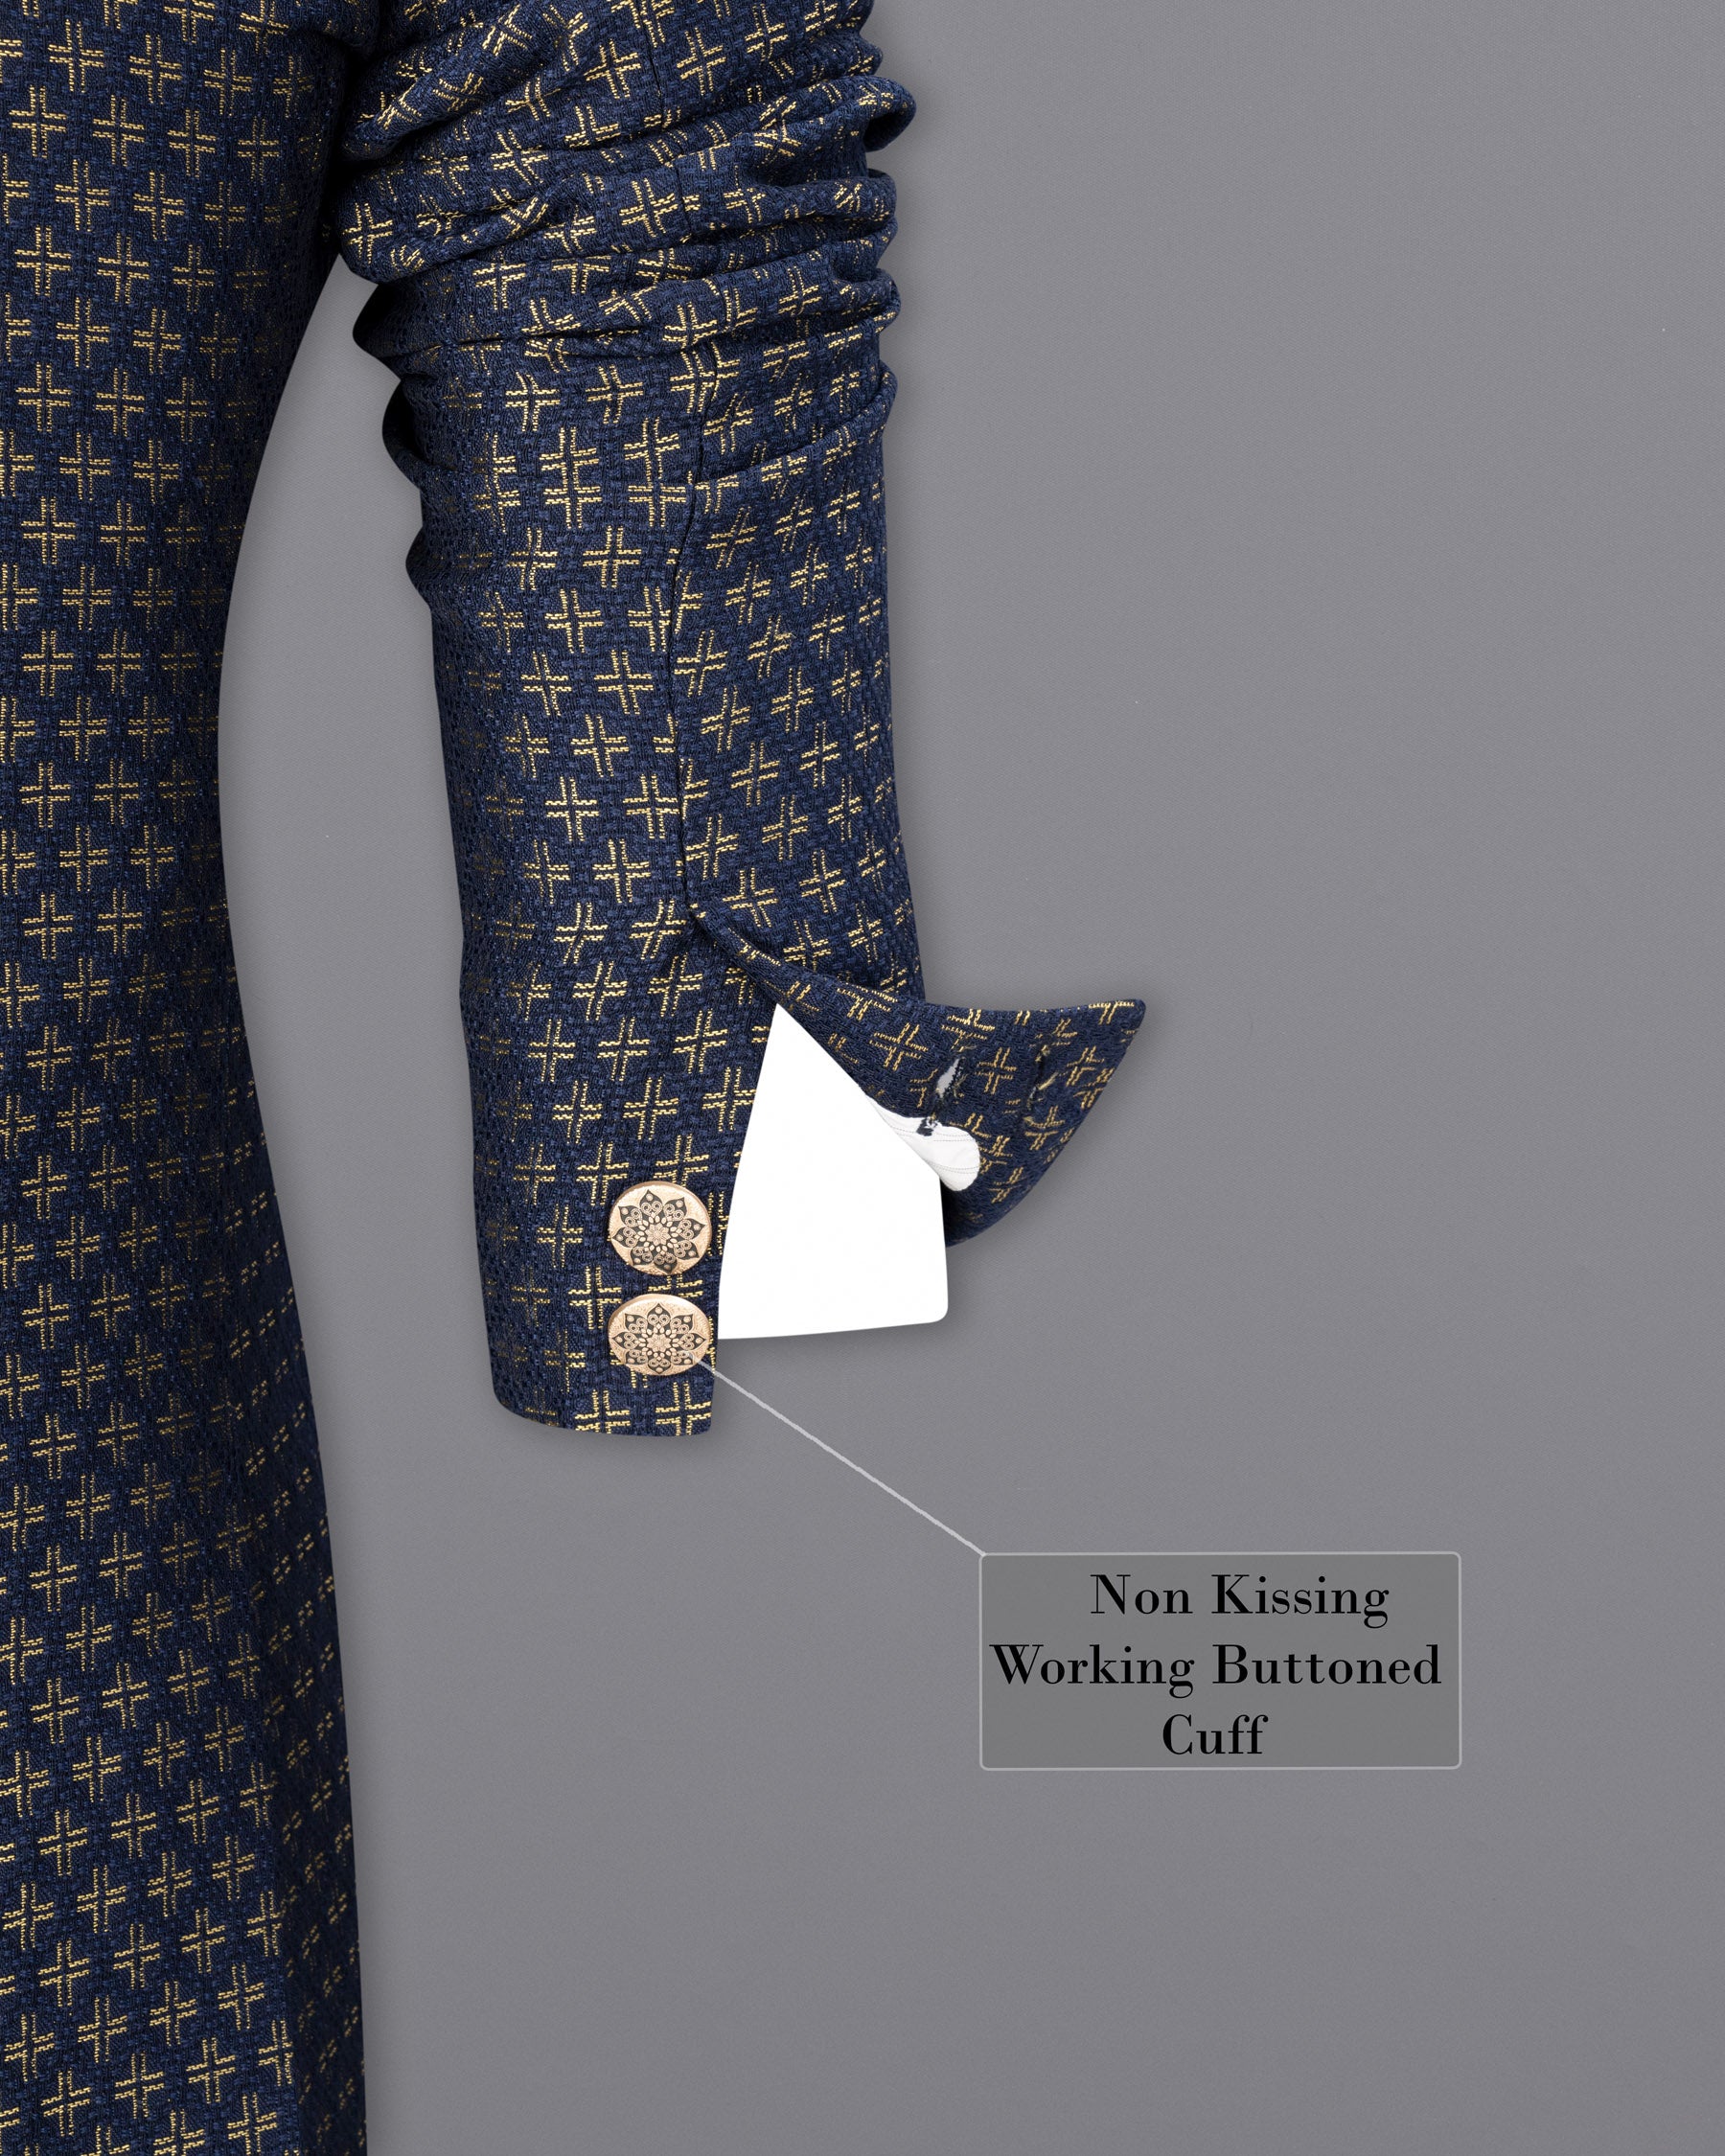 Stratos Blue Houndstooth Texture Cross Placket Bandhgala Suit